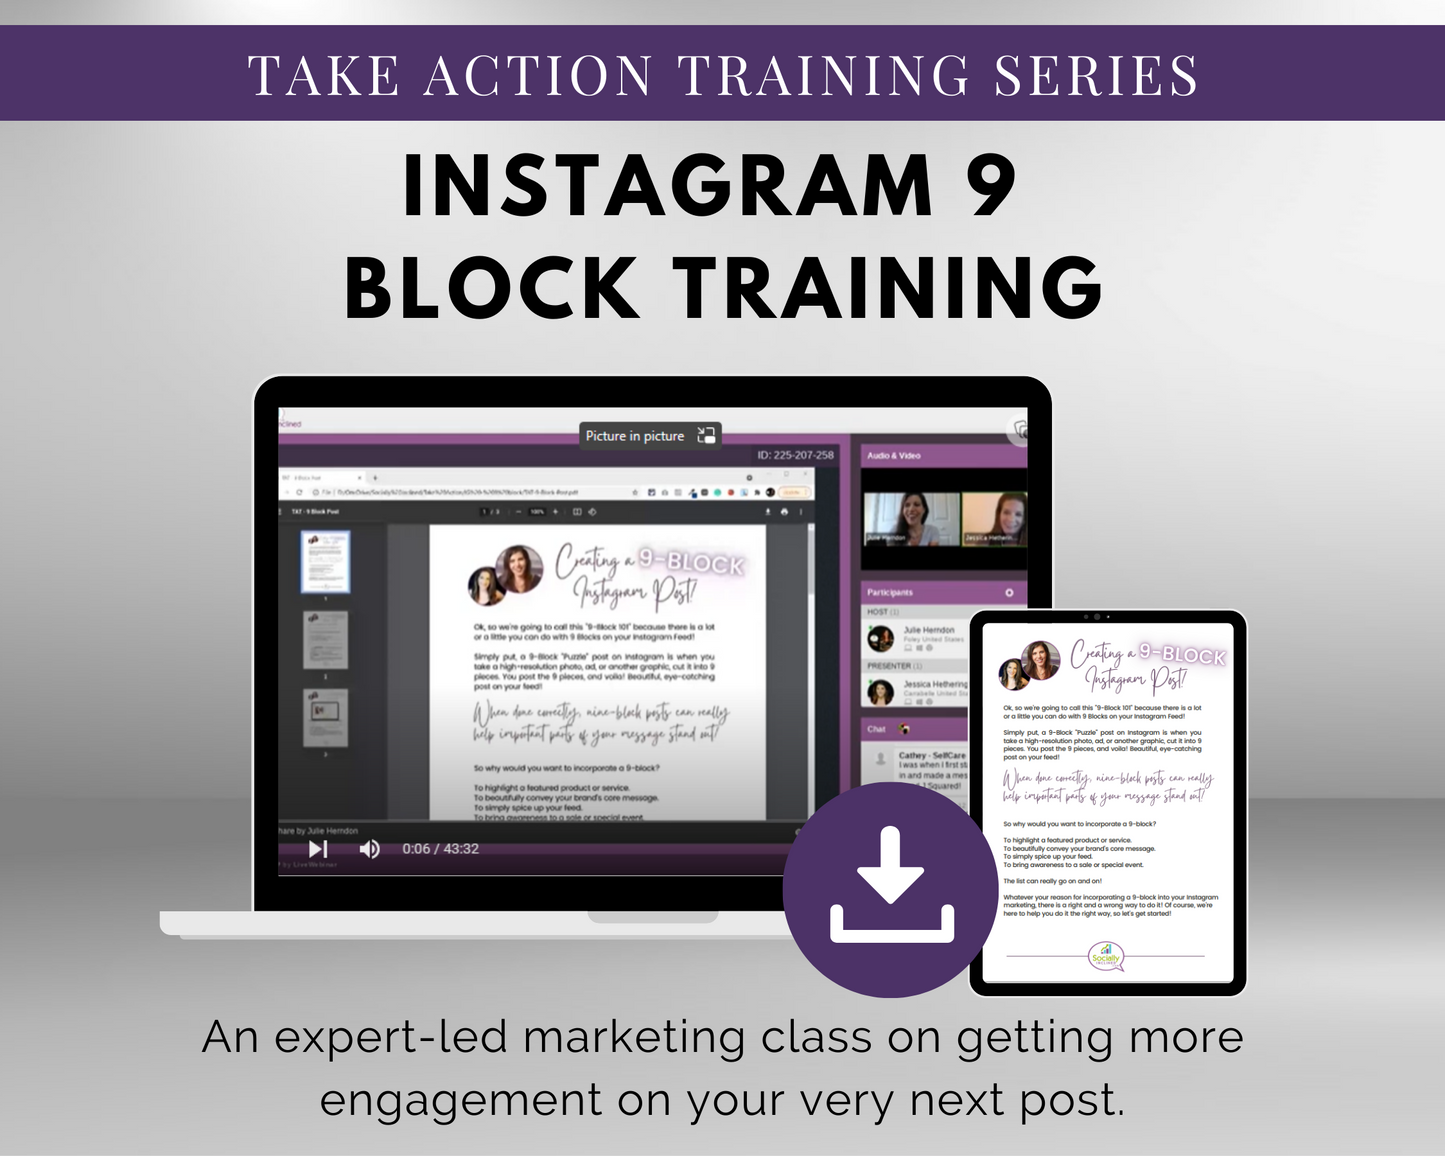 Take action training for Instagram with the TAT - Instagram 9 Block Training Masterclass by Get Socially Inclined.